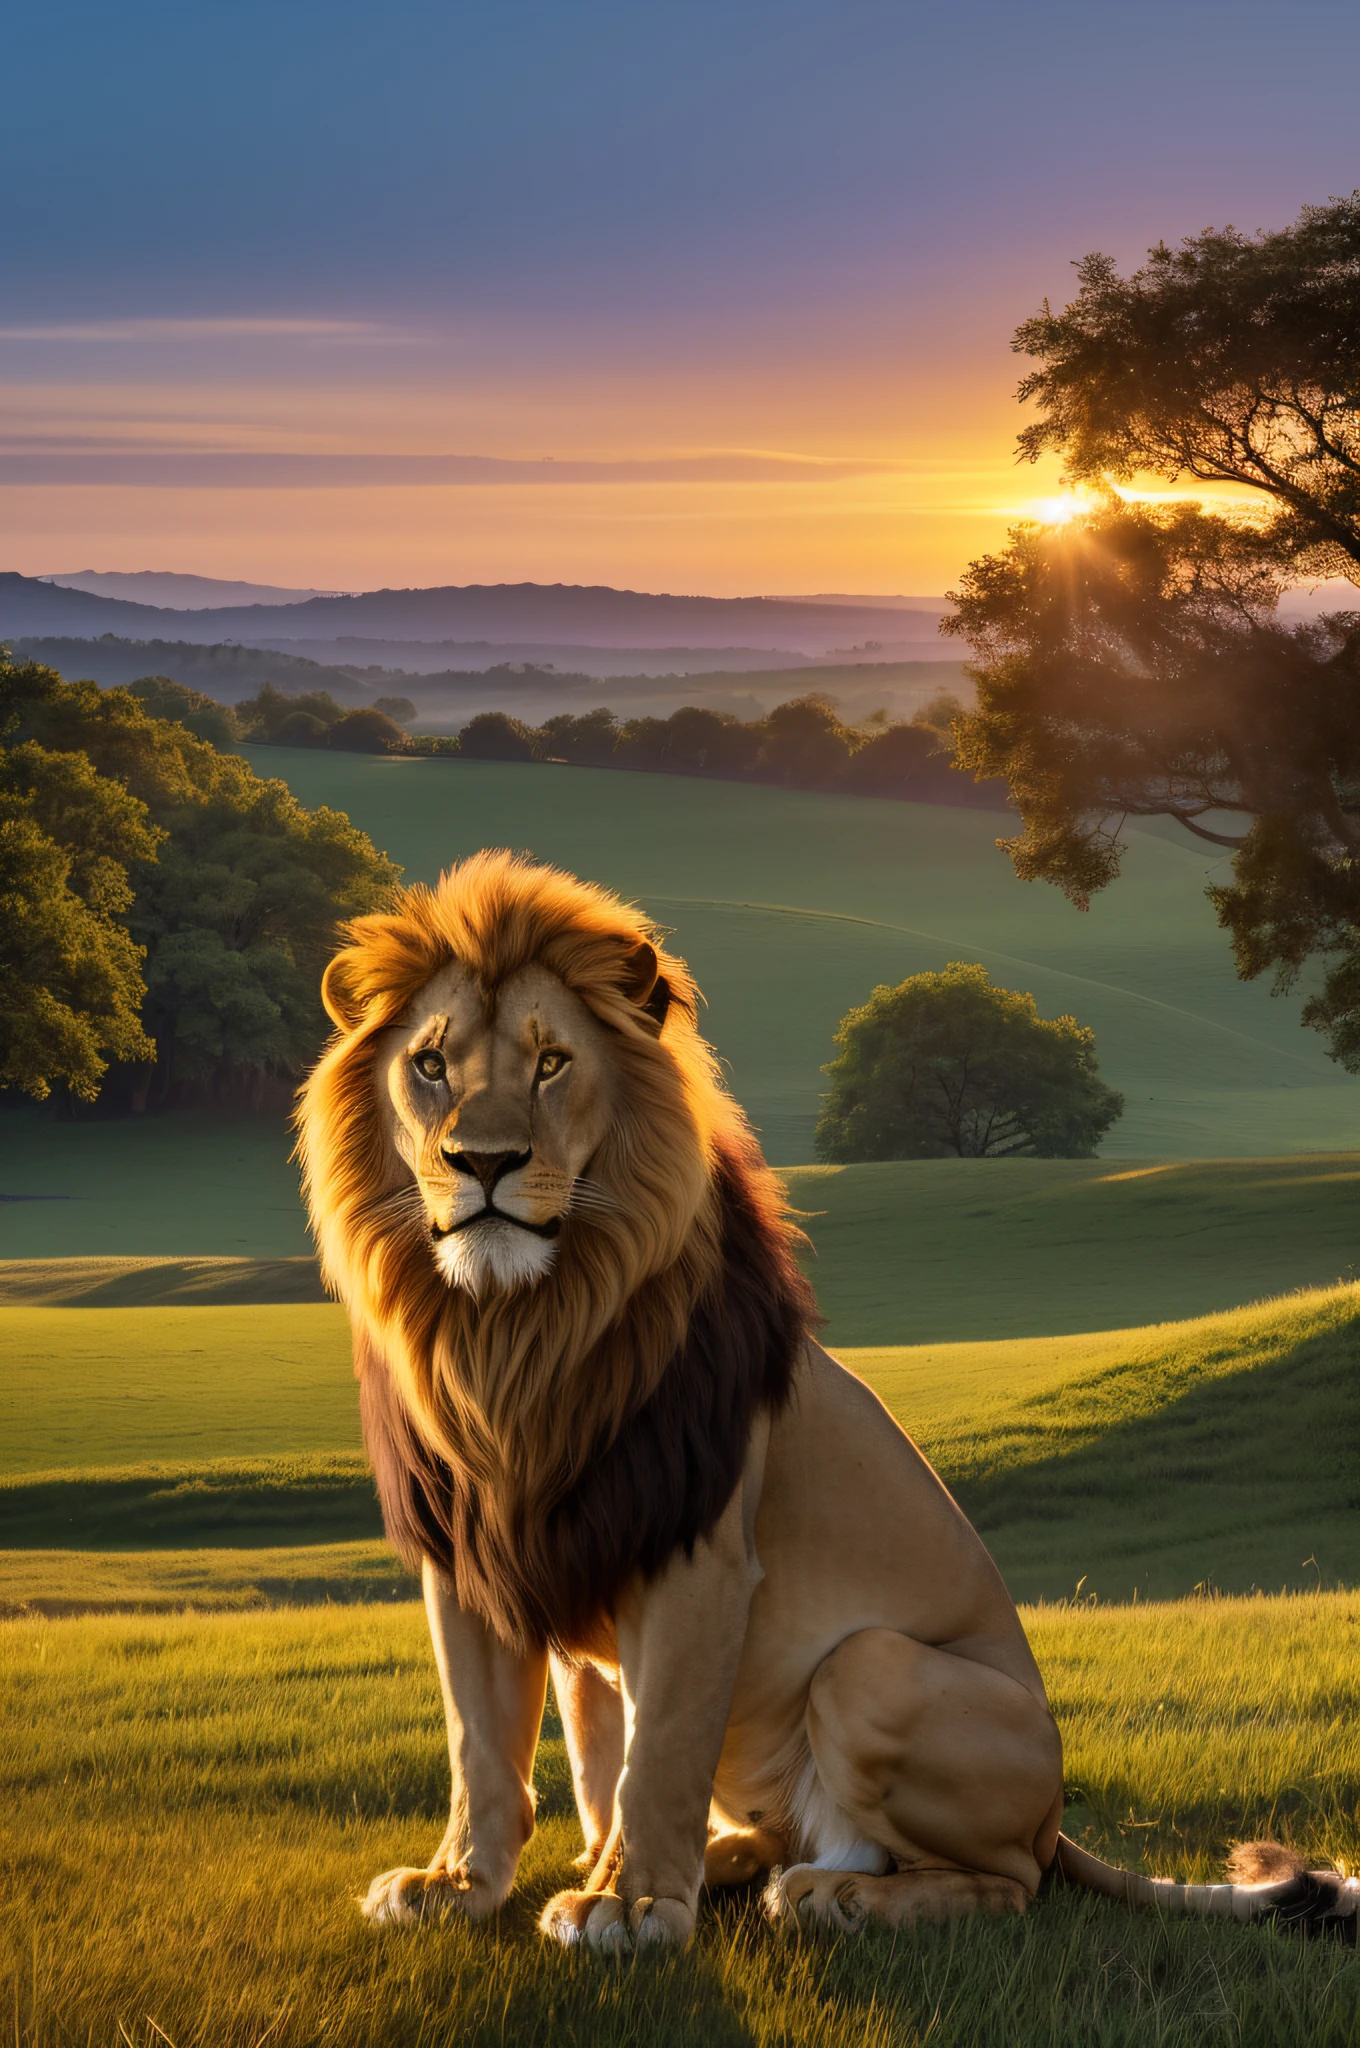 (A lion sitting on the edge of a hill, observing the sunset), (best quality,4k,highres,masterpiece:1.2), ultra-detailed,(realistic,photorealistic,photo-realistic:1.37), (landscape), (vivid colors, warm tones), (studio lighting), (lion's muscular build), (golden mane gently swaying in the wind), (long shadows cast by the setting sun), (majestic posture and focused gaze), (peaceful and serene atmosphere), (blazing orange and purple hues in the sky), (lush green grass on the hill), (silhouette of nearby trees), (soft breeze rustling the lion's mane), (golden sunlight illuminating the lion's face), (subtle play of light and shadow on the lion's fur), (captivating scene with a sense of tranquility), (stunning natural beauty), (dramatic perspective), (deep sense of connection with nature).